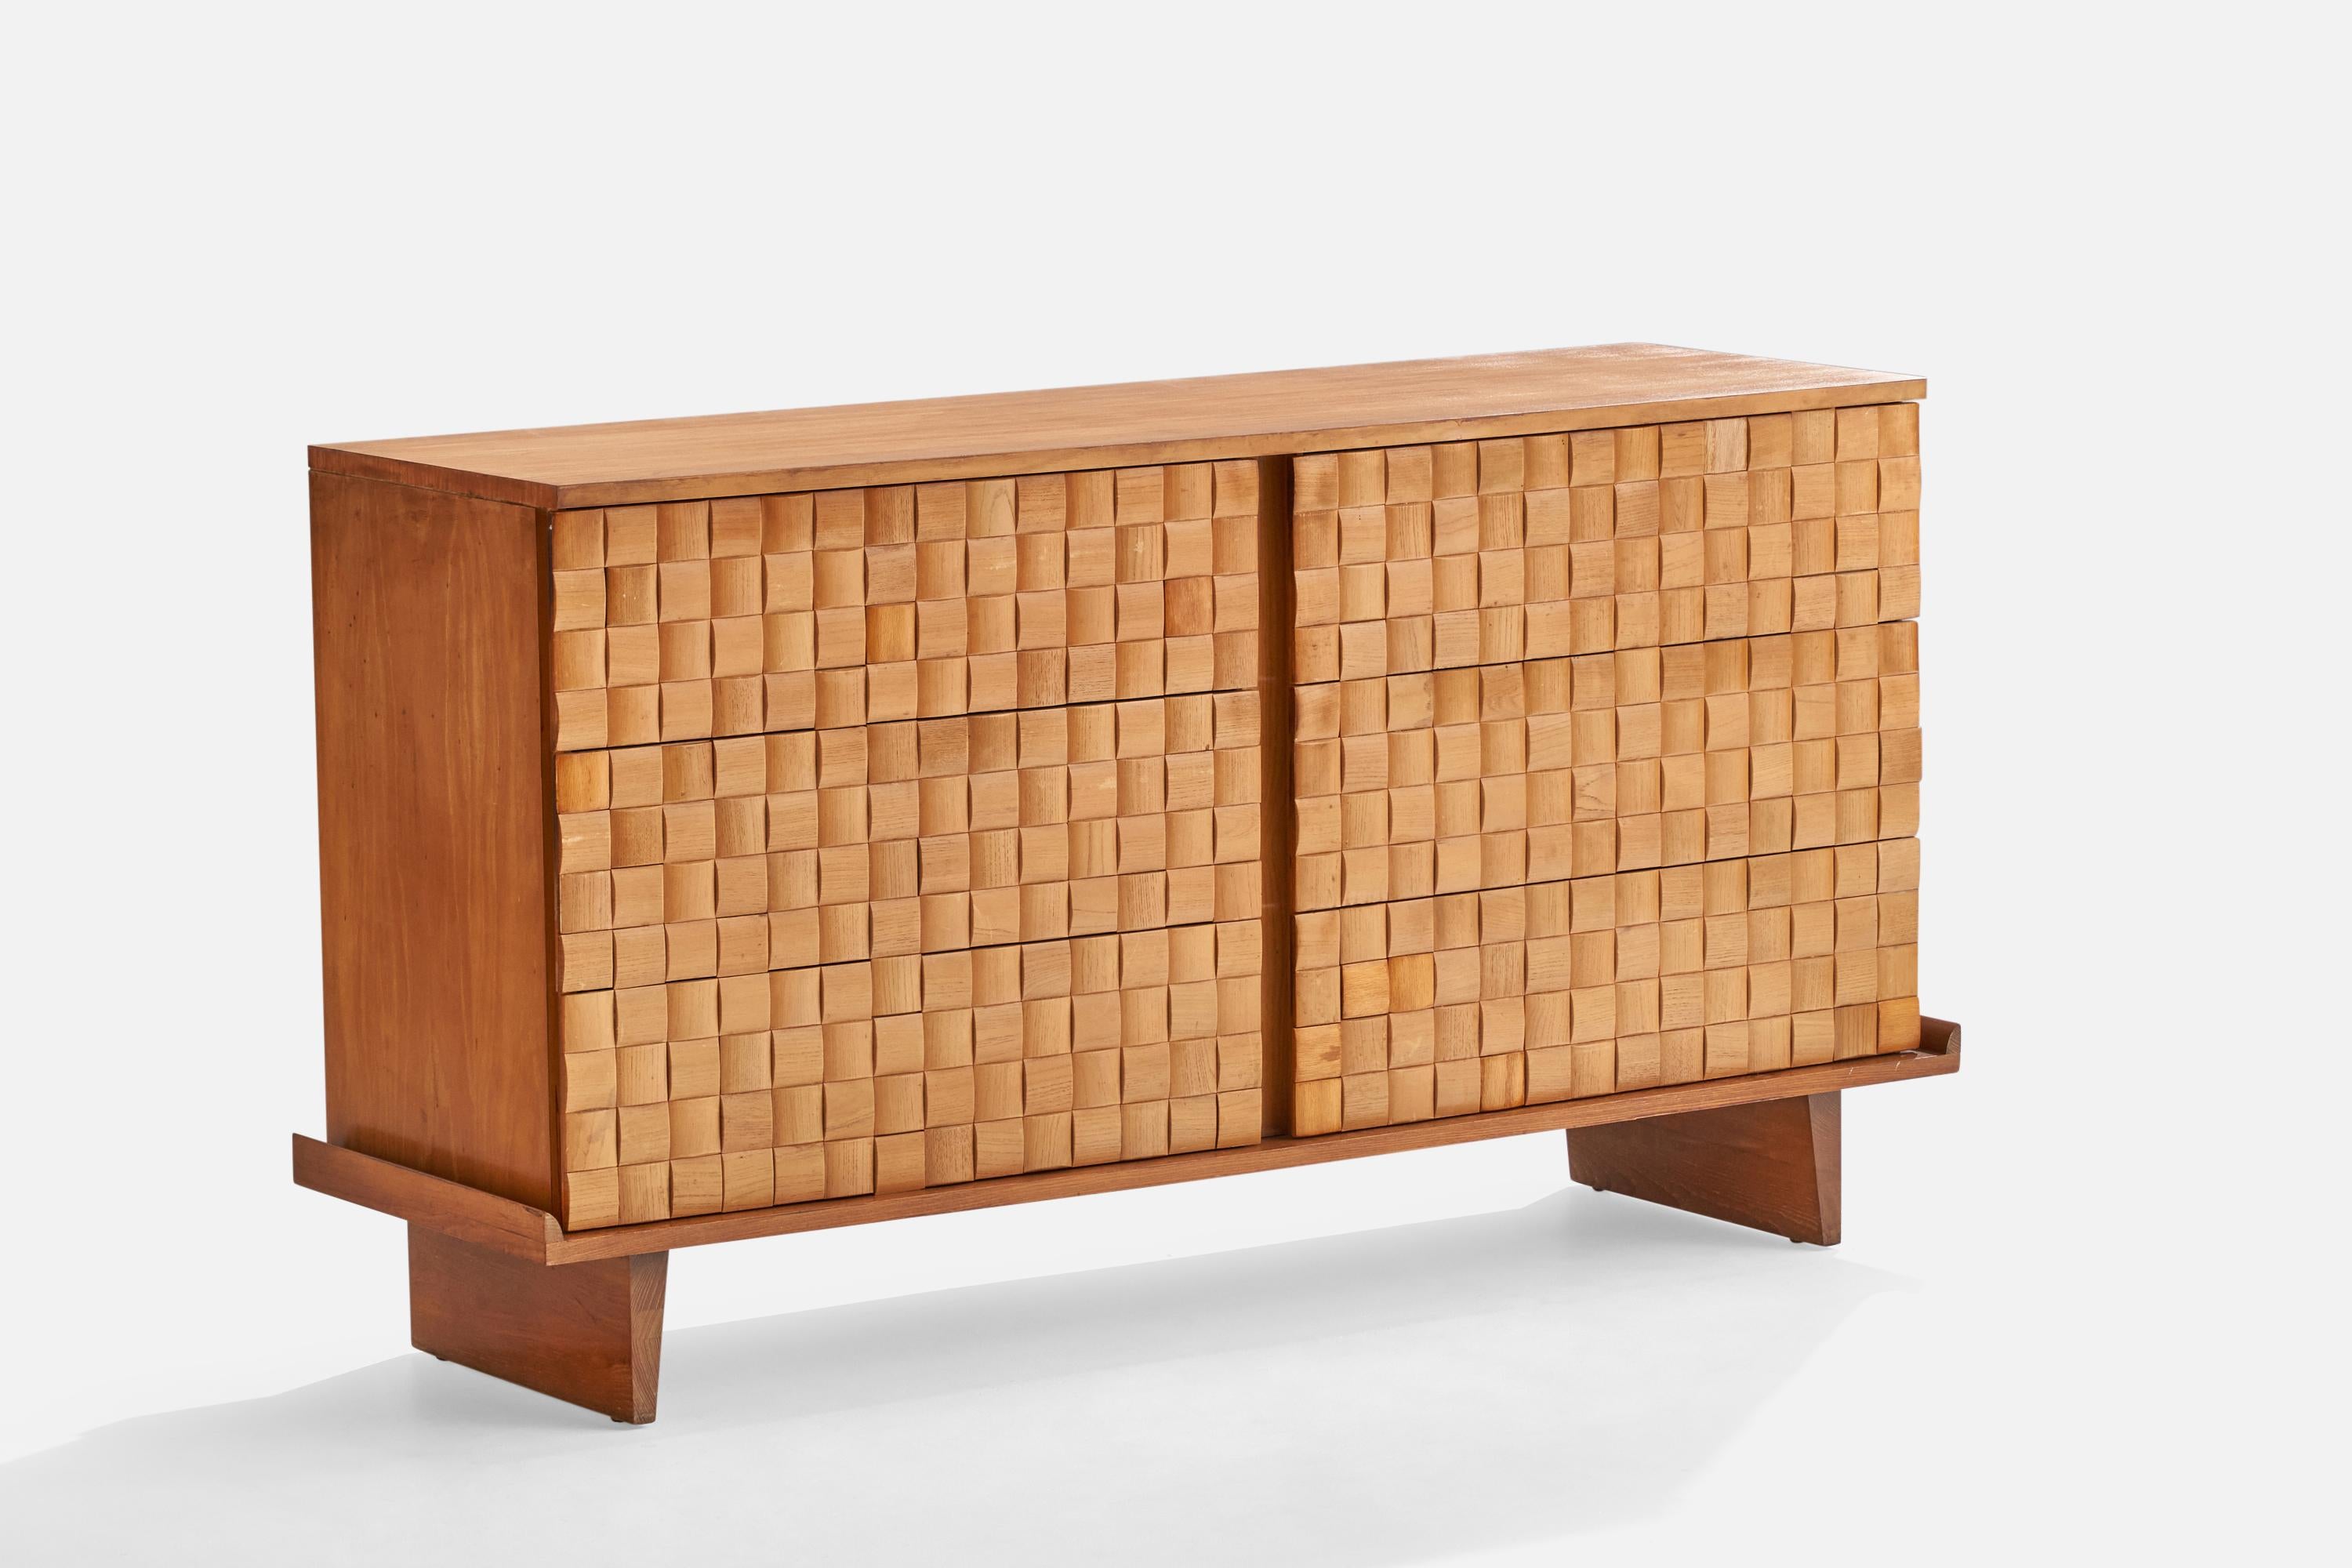 An oak dresser designed designed by Paul Laszlo and produced by Brown Saltman, USA, 1950s.